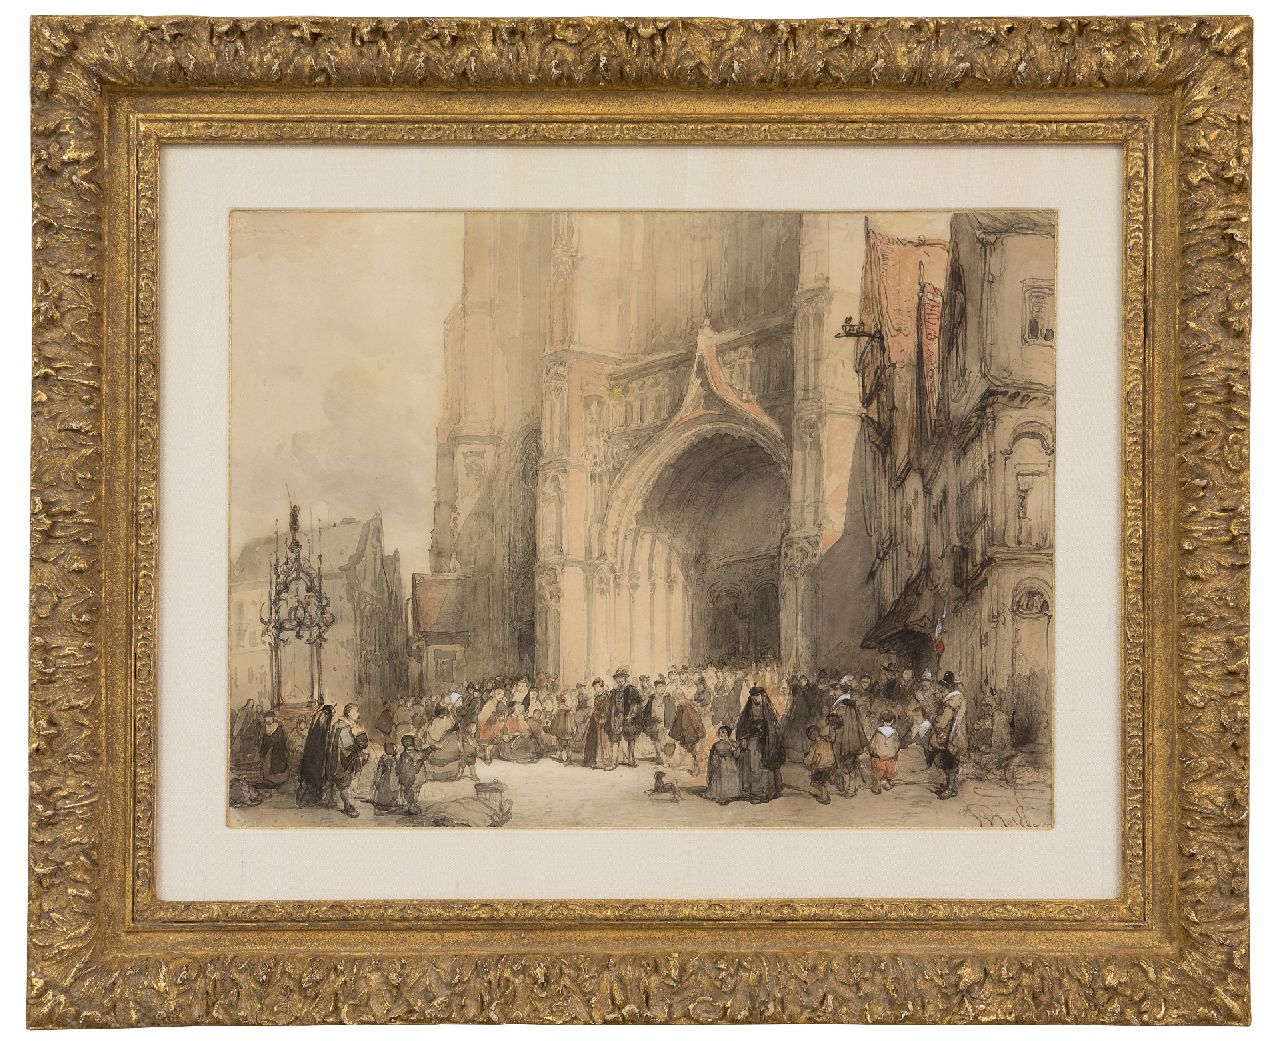 Bosboom J.  | Johannes Bosboom, The cathedral of Antwerpen after service, ink, chalk and watercolour on paper 30.7 x 40.7 cm, signed l.r.